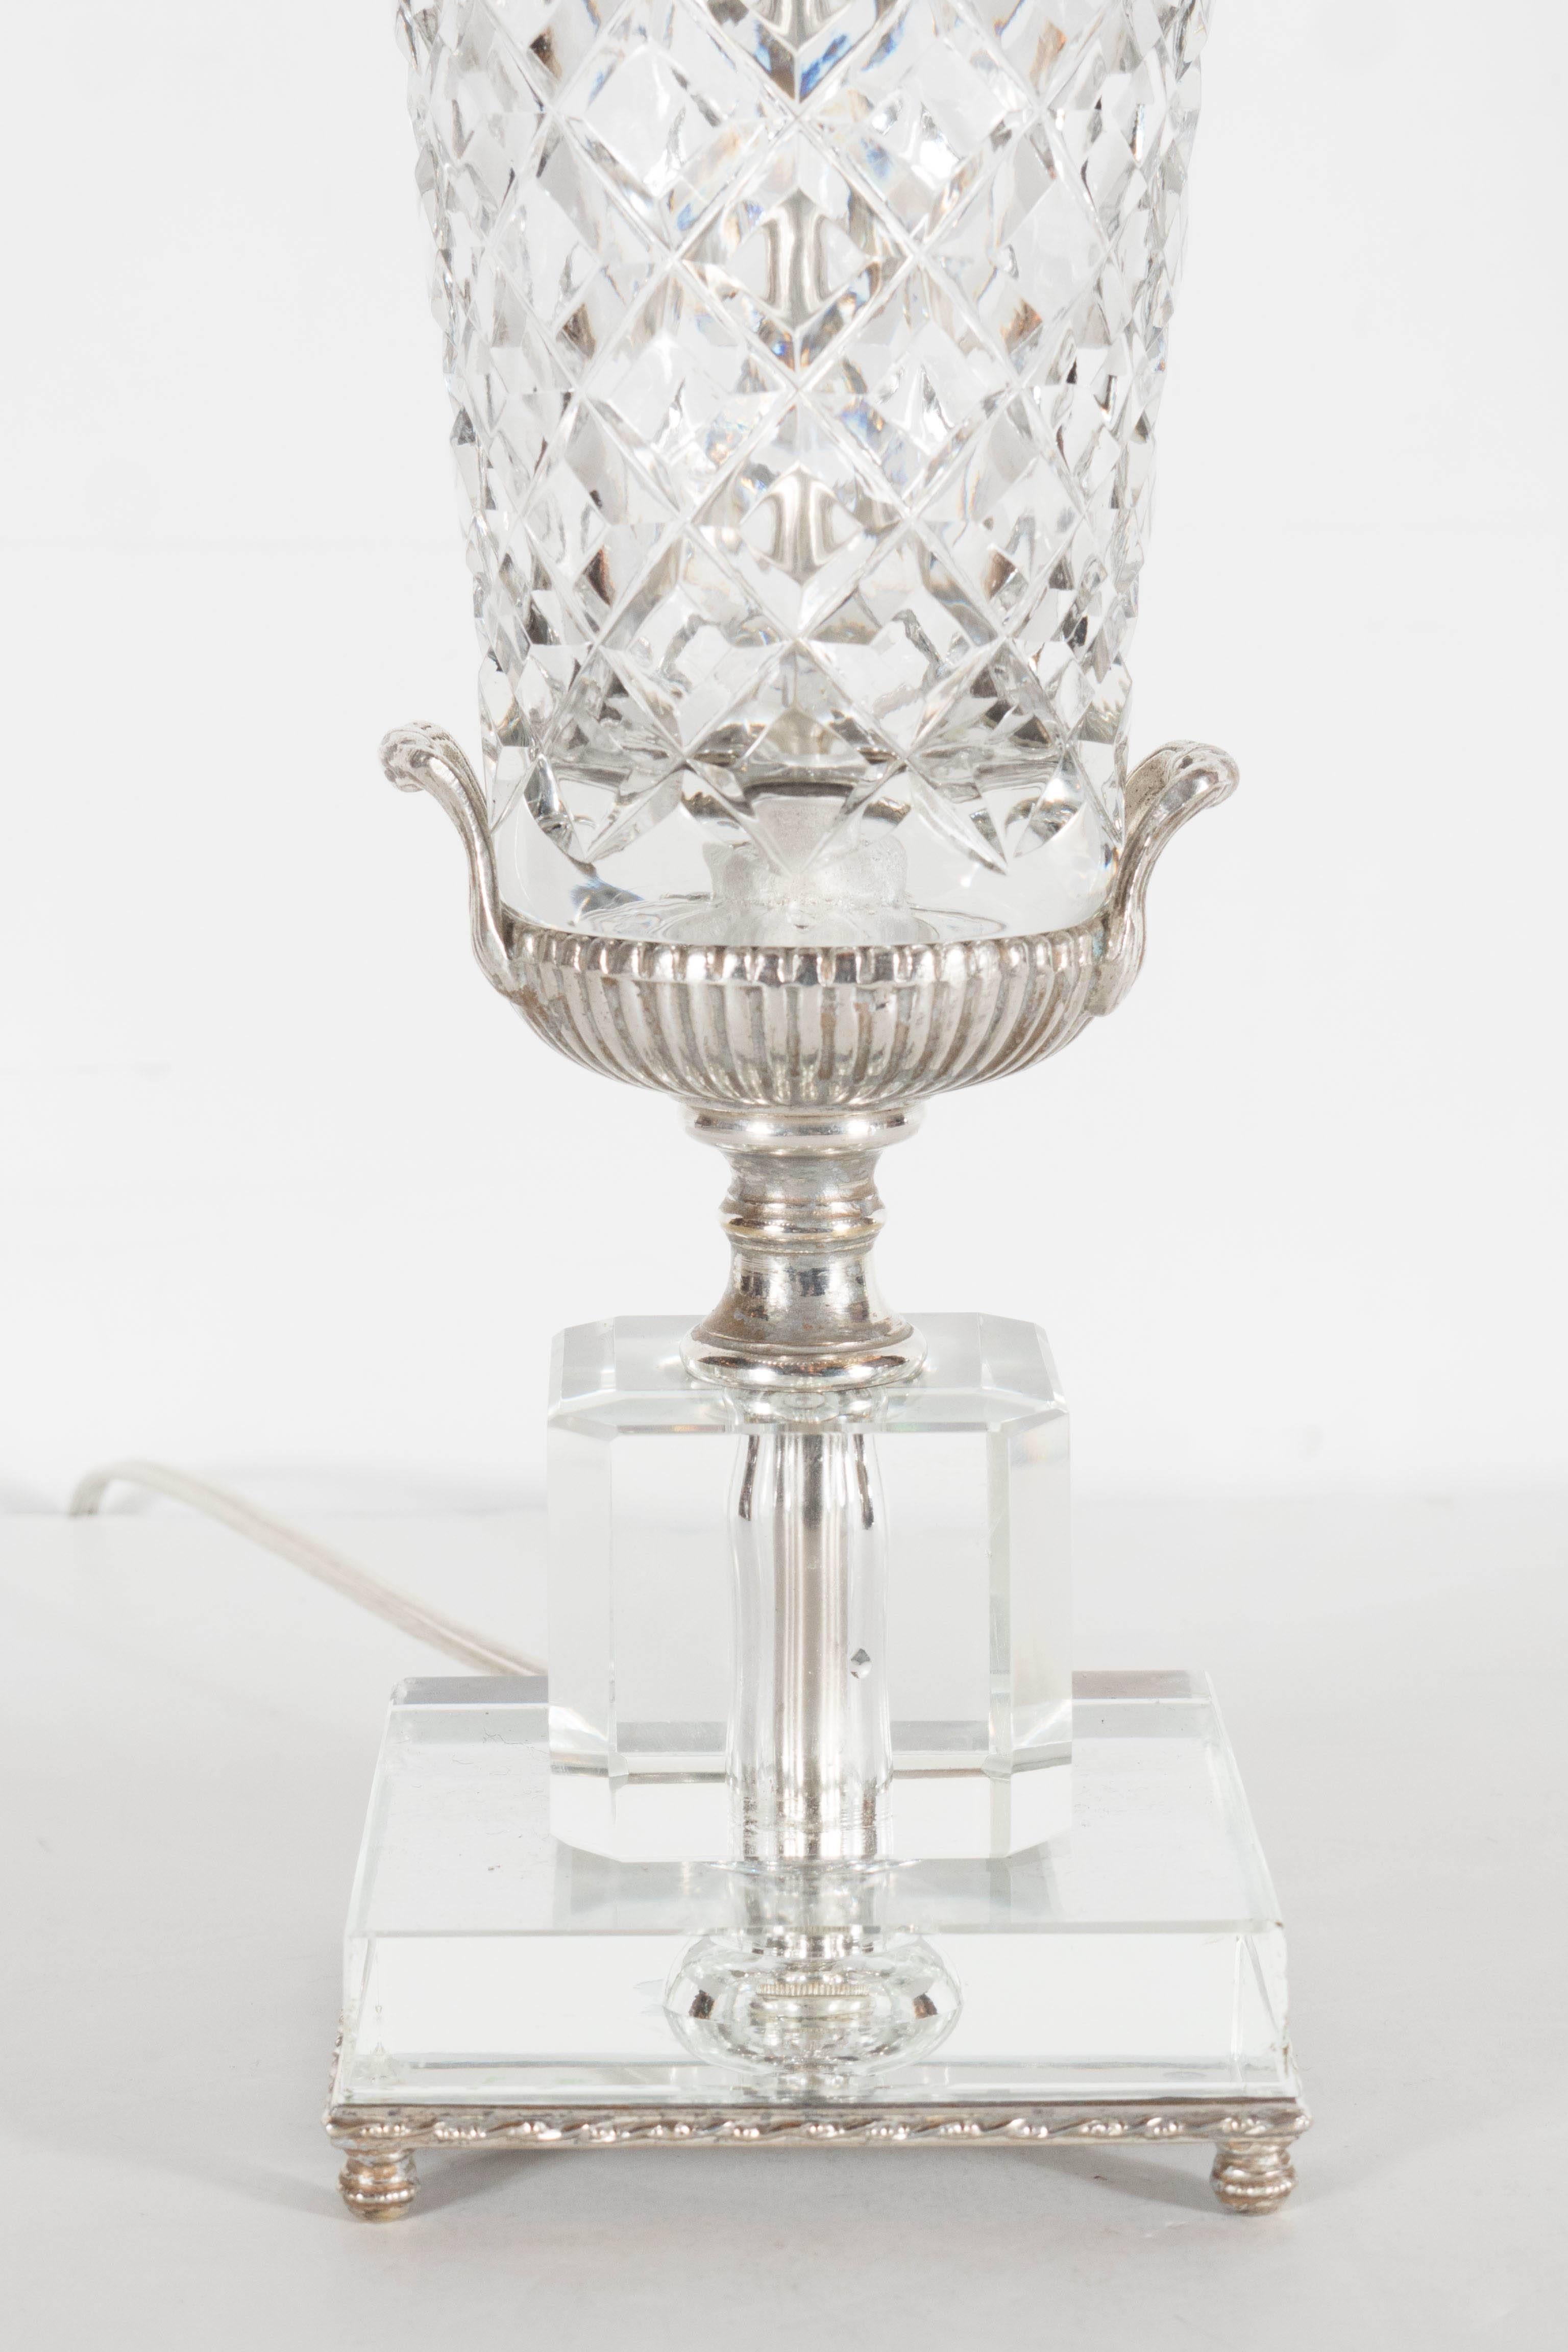 Hollywood Regency 1940s Hollywood Cut Crystal Urn Form Table Lamp with Silvered Fittings